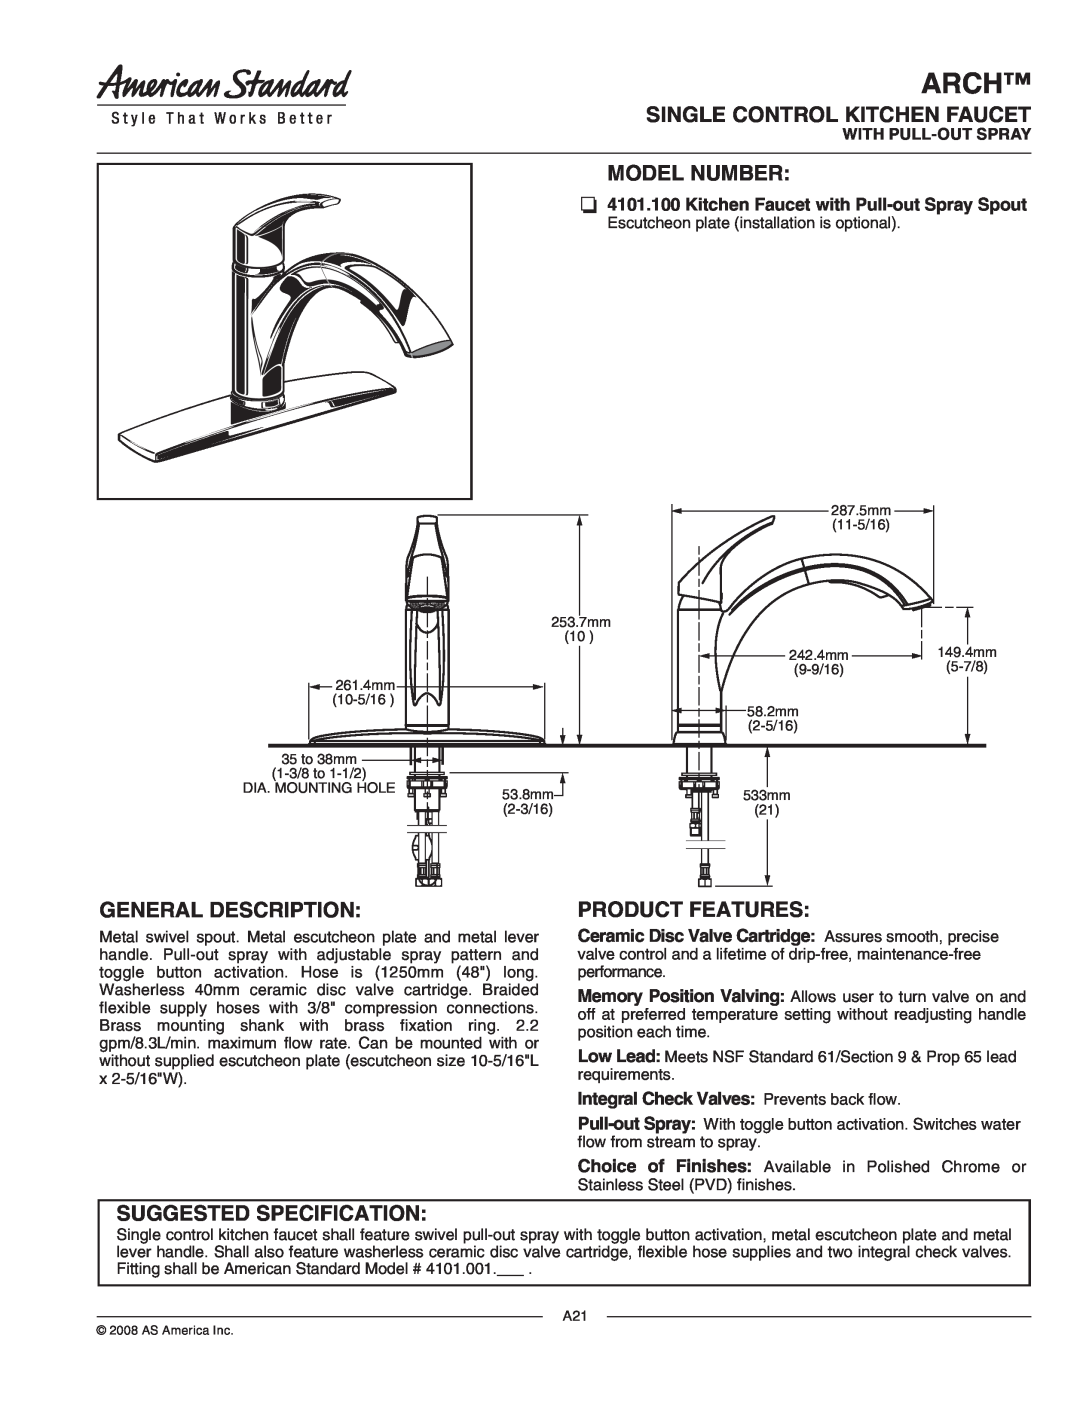 American Standard 4101.001 specifications Arch, Kitchen Faucet with Pull-outSpray Spout, With Pull-Outspray, Model Number 